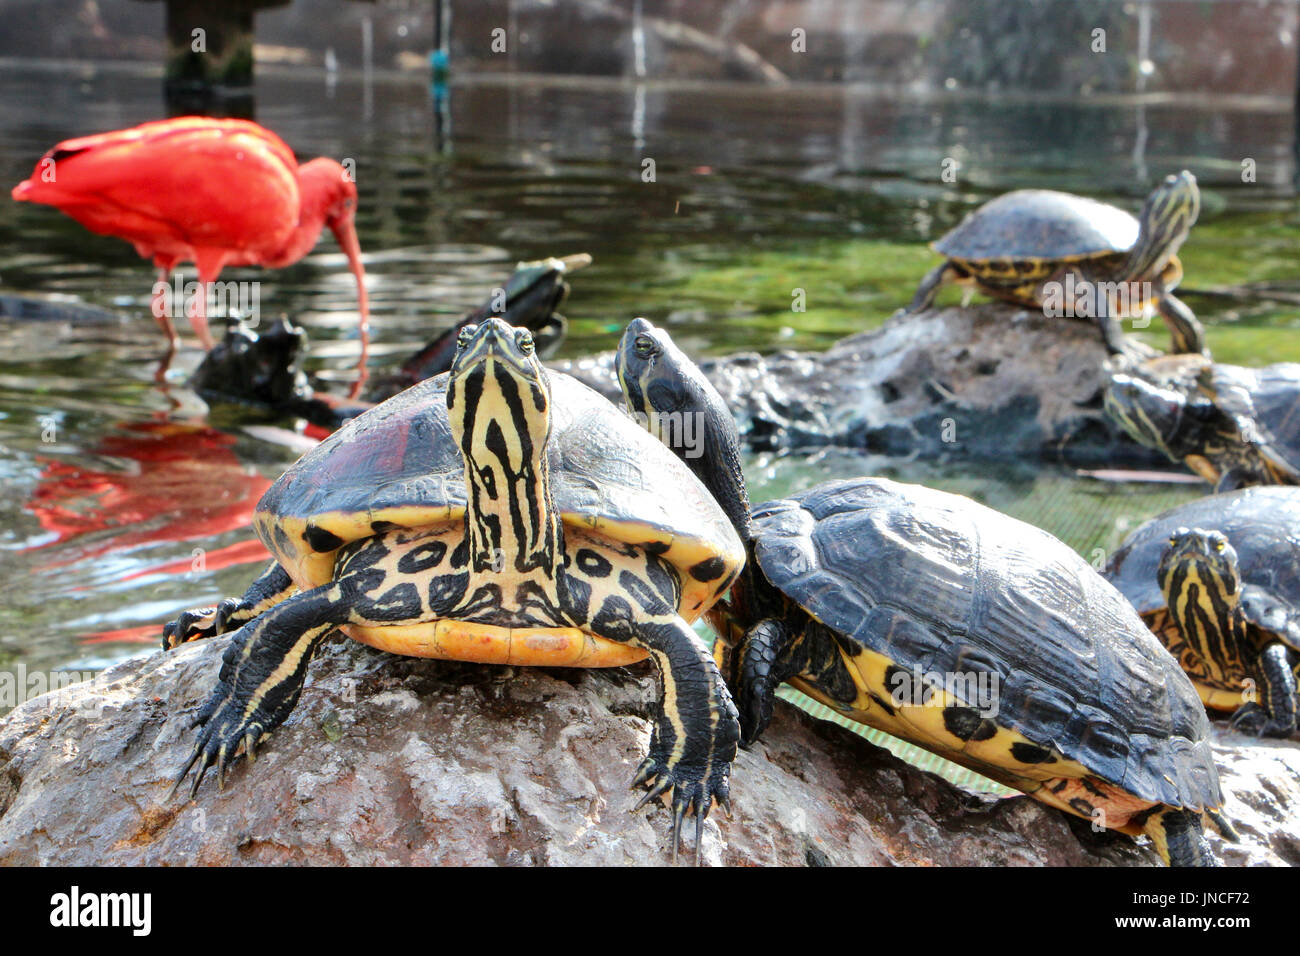 Turtles sunning in front of a Scarlet Ibis at the Oceanografic in Valencia, Spain Stock Photo